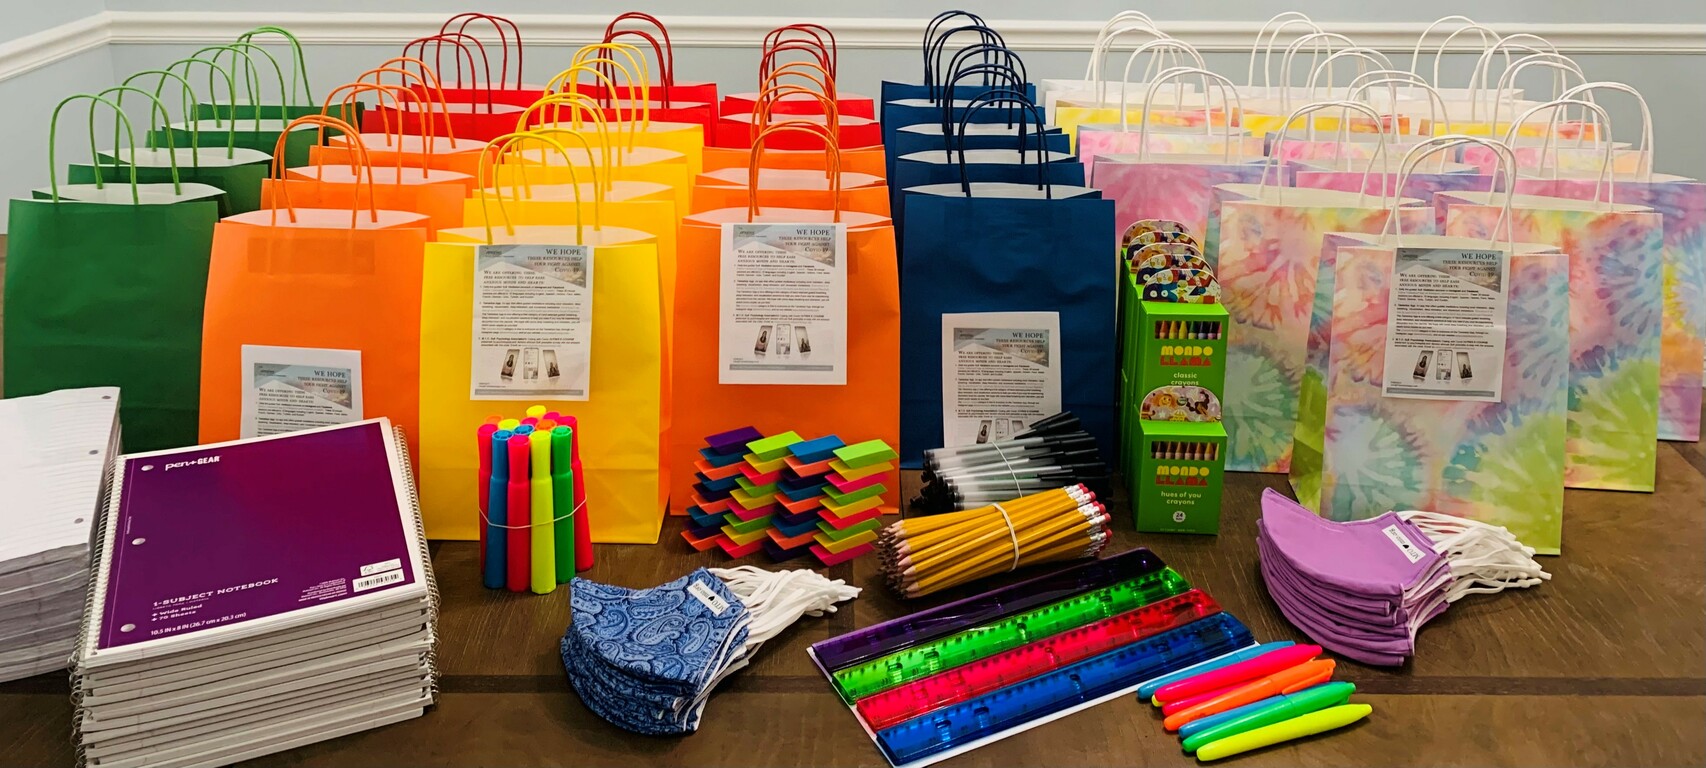 M.T.O. Houston Donates School Supplies to Students in Need